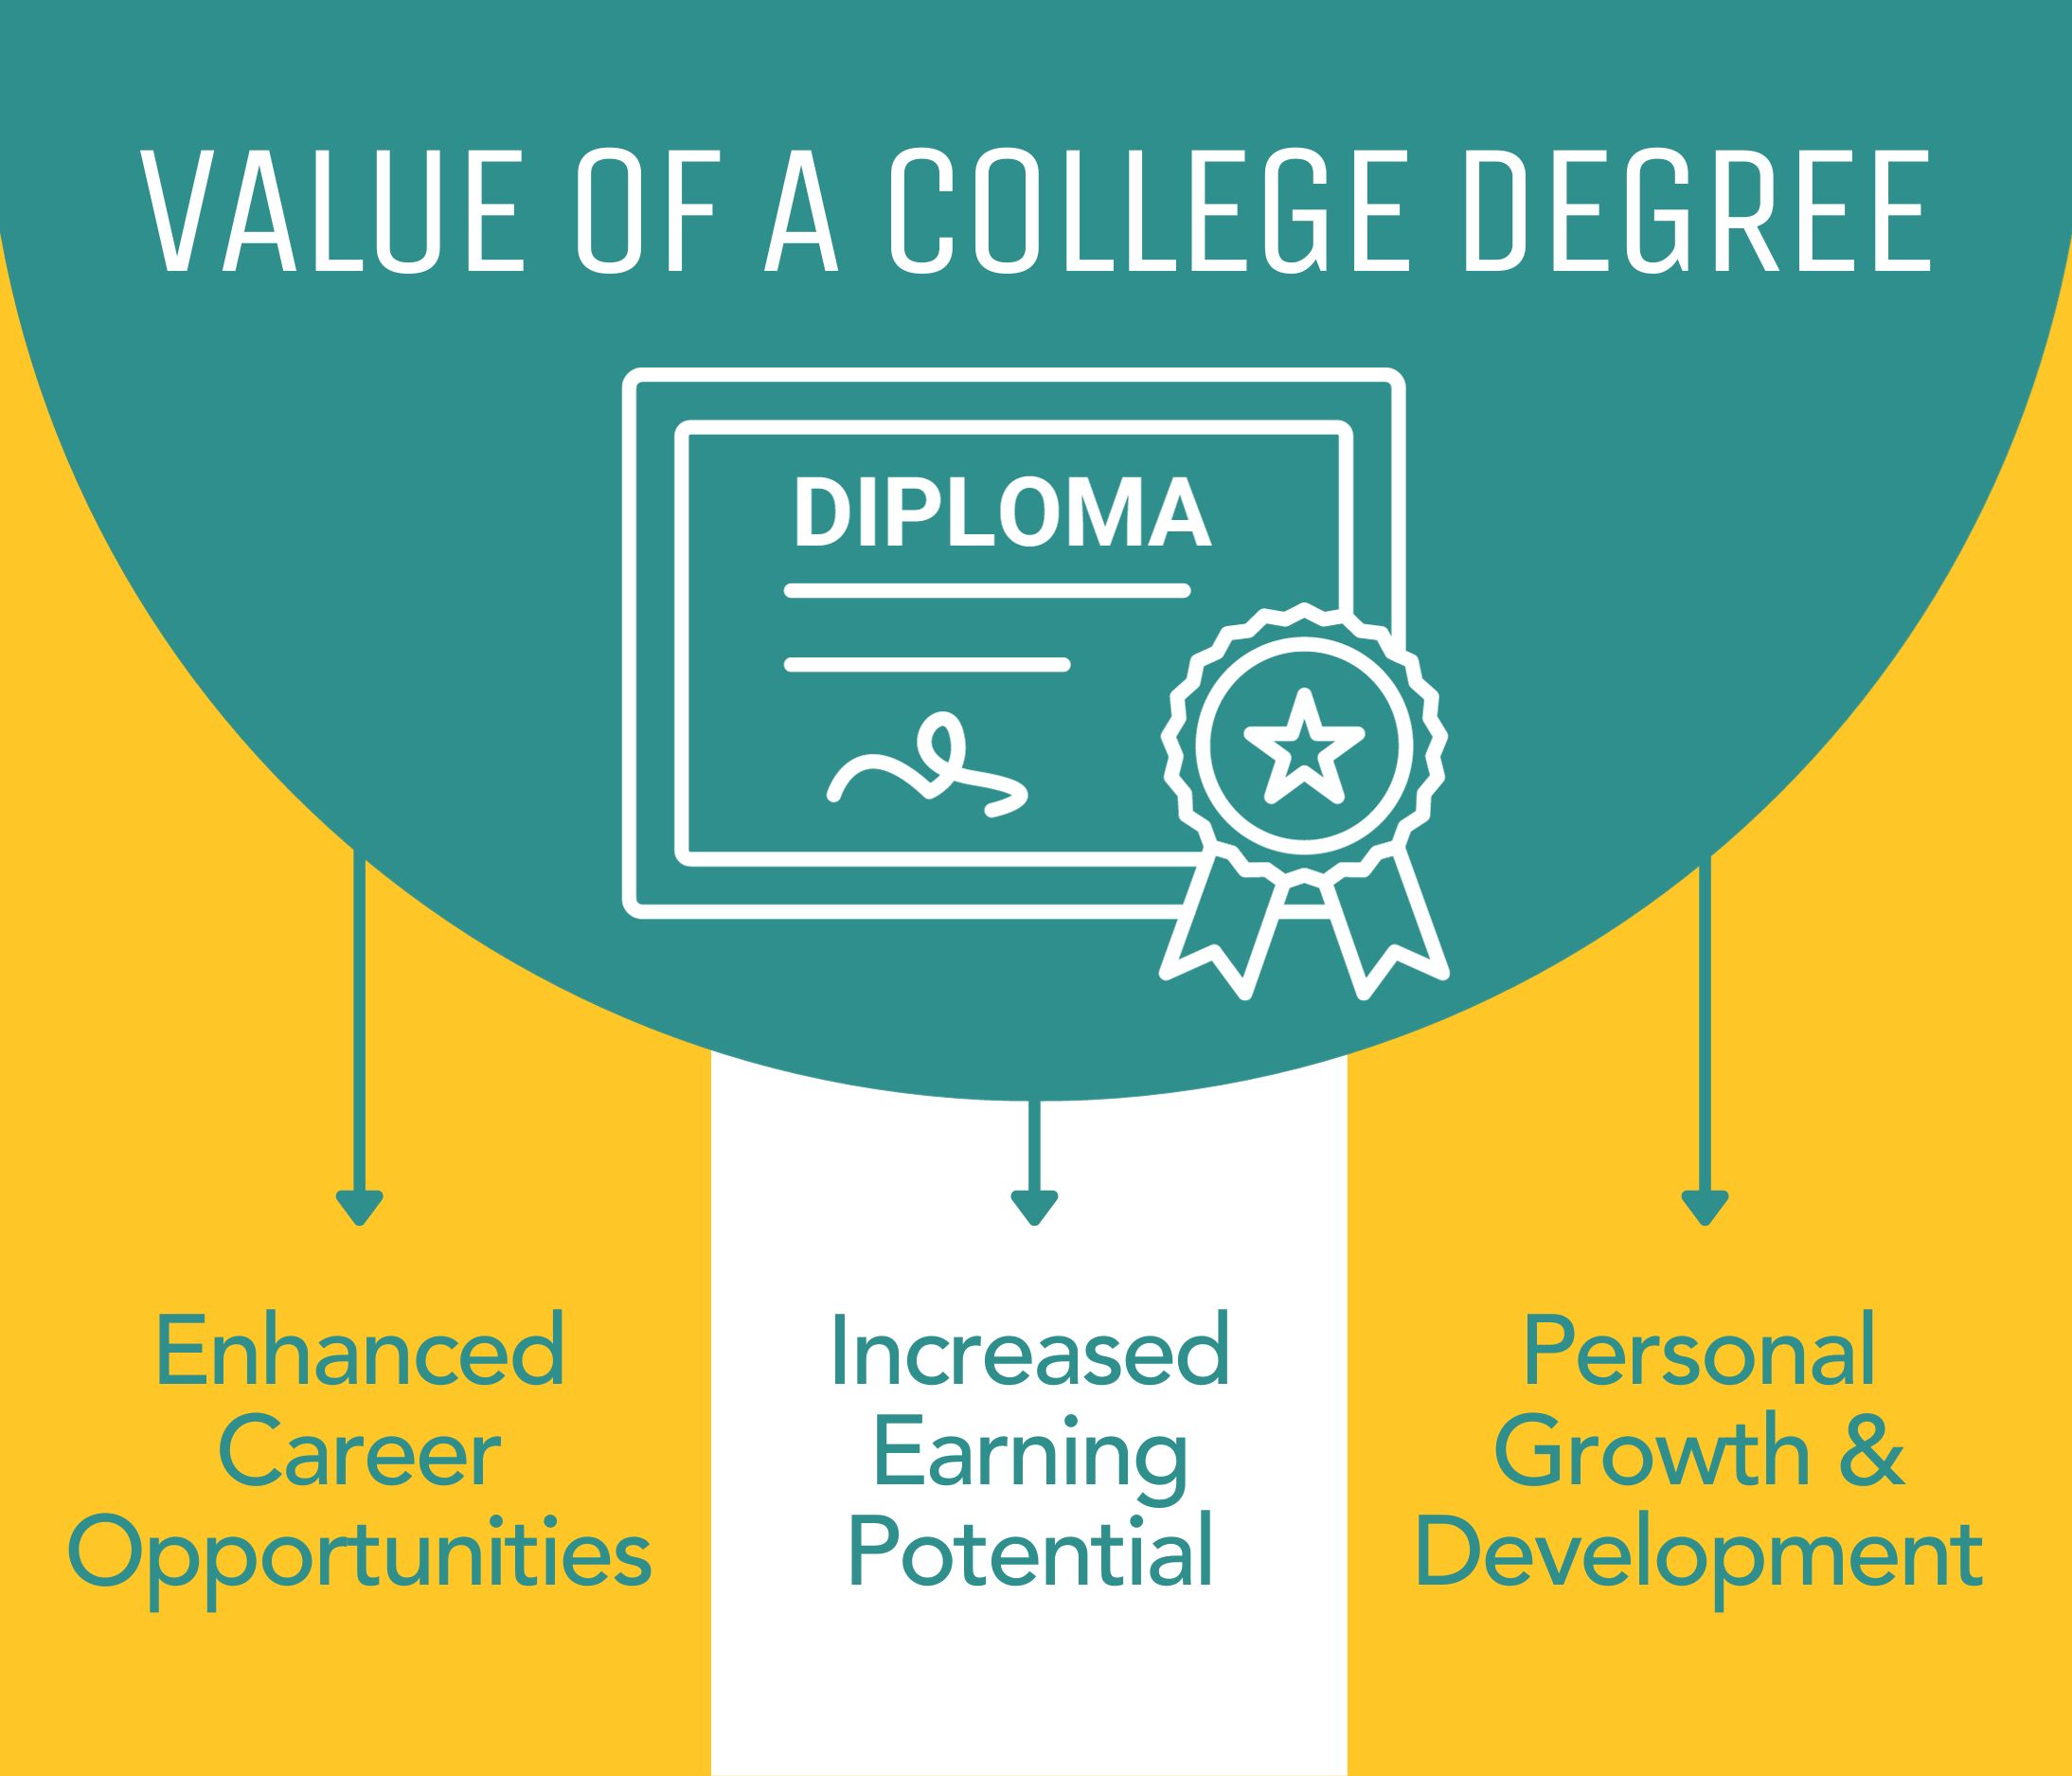 Financial Benefits of getting a college degree: enhanced career opportunities, increased earning potential, personal growth and development